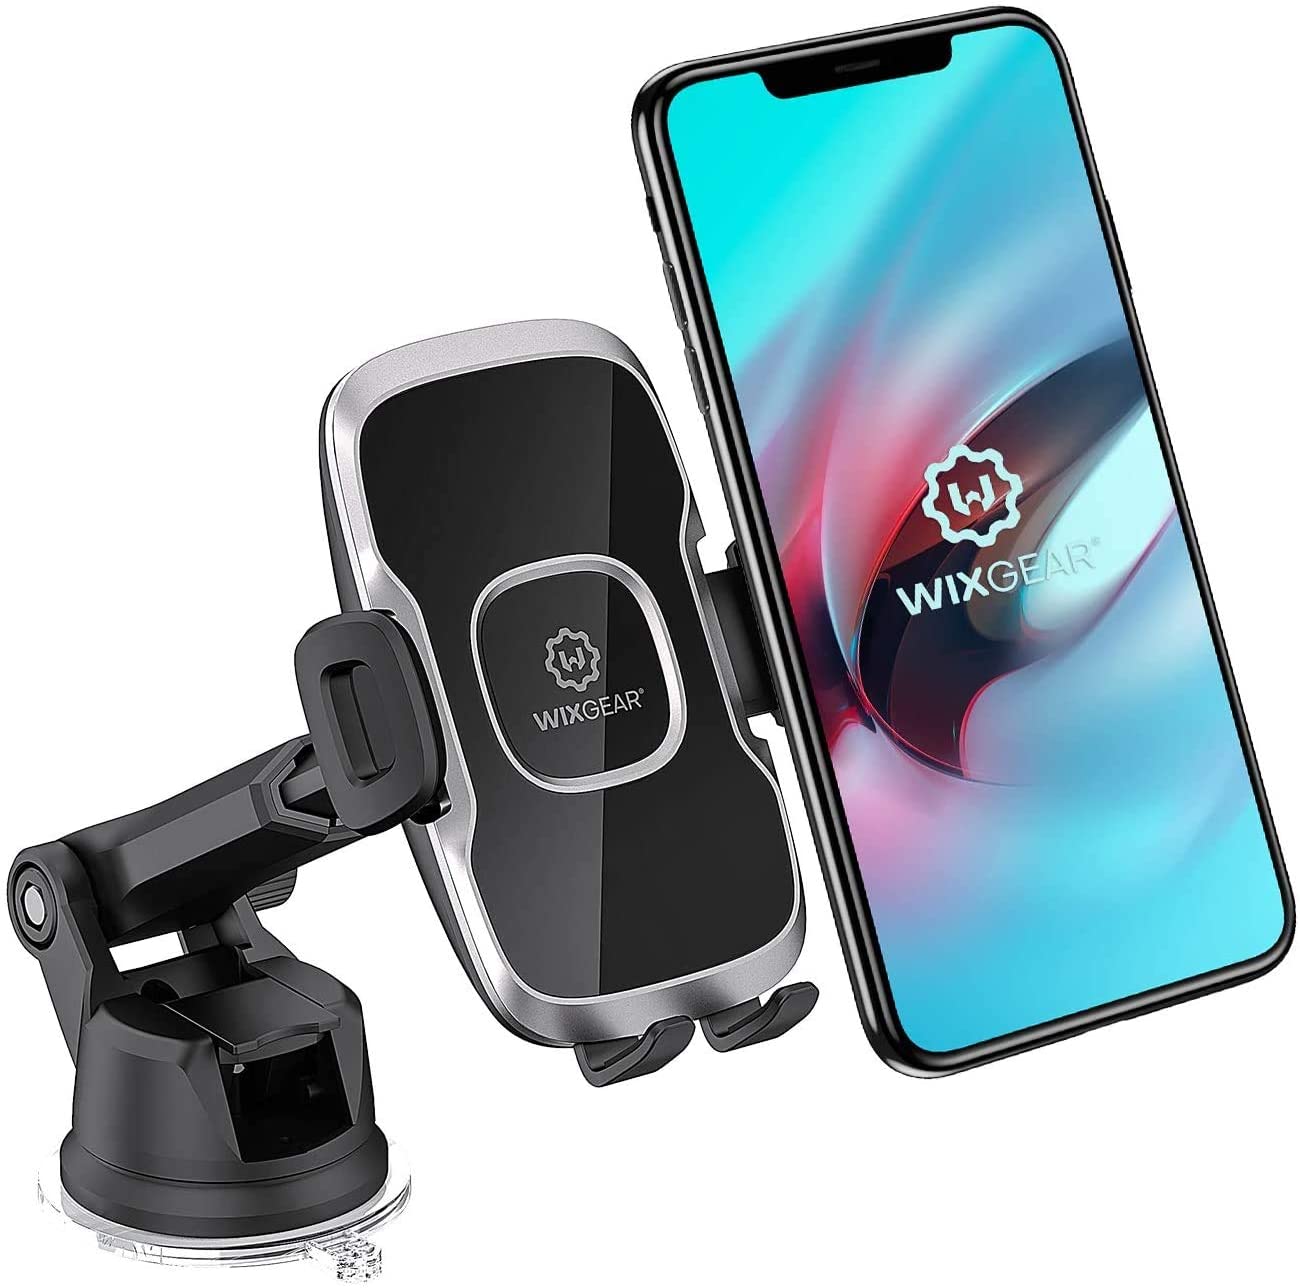 Phone Holder for Car, Wixgear Universal Dashboard Windshield Phone Car Suction Cup Mount Holder for Cell Phone 360 Degree Rotation